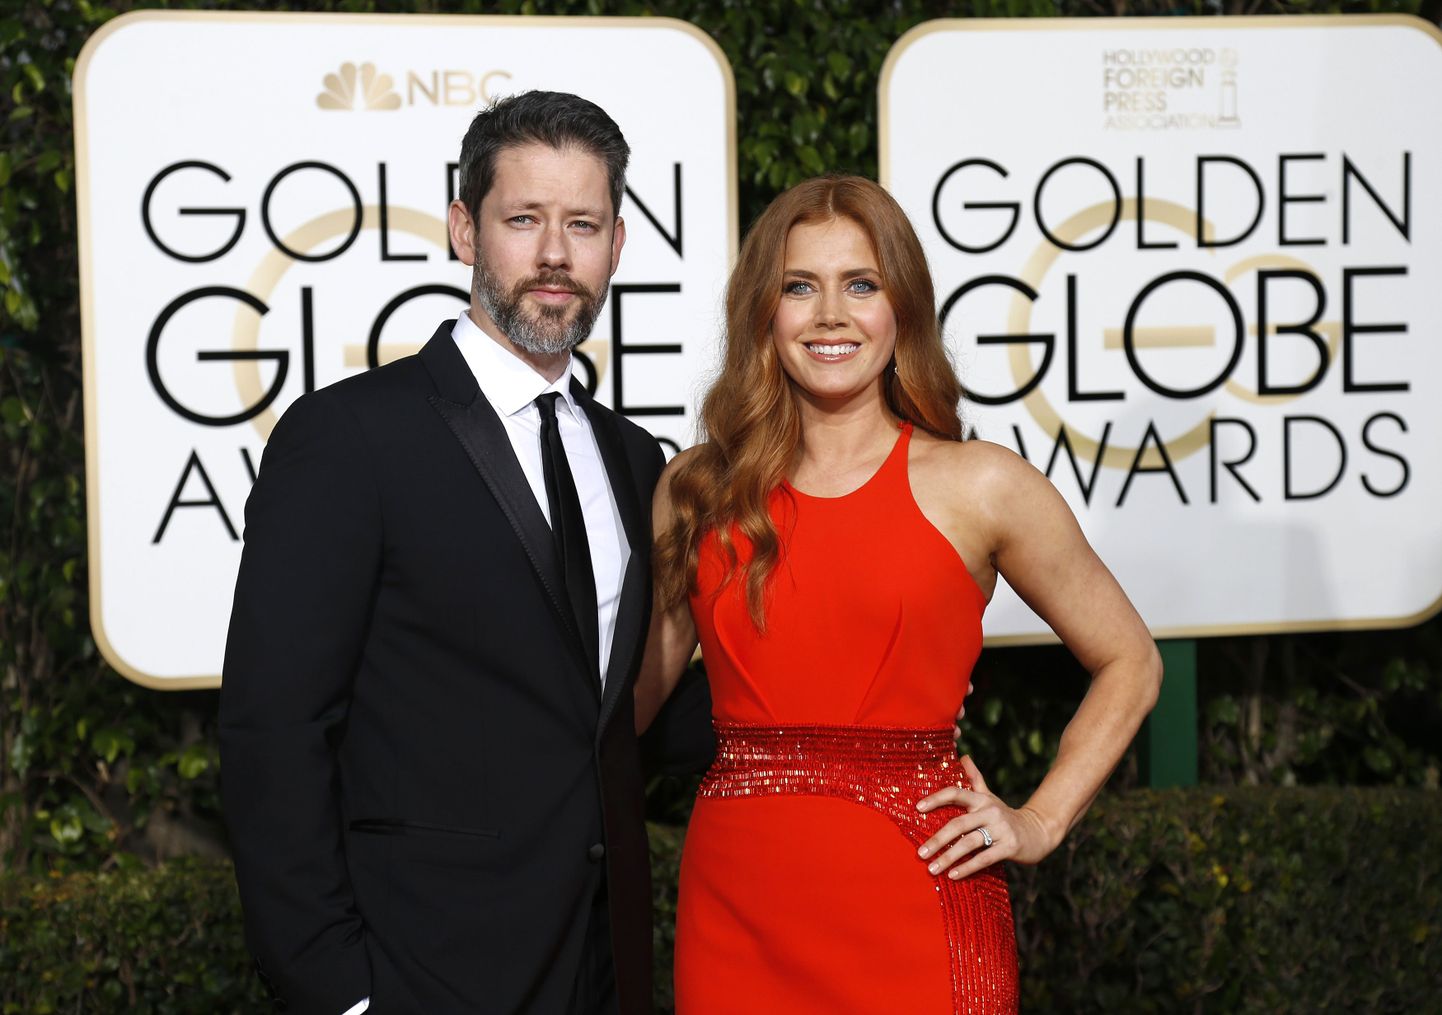 Actress Amy Adams and her husband Darren Le Gallo arrive at the 73rd Golden Globe Awards in Beverly Hills, California January 10, 2016.  REUTERS/Mario Anzuoni